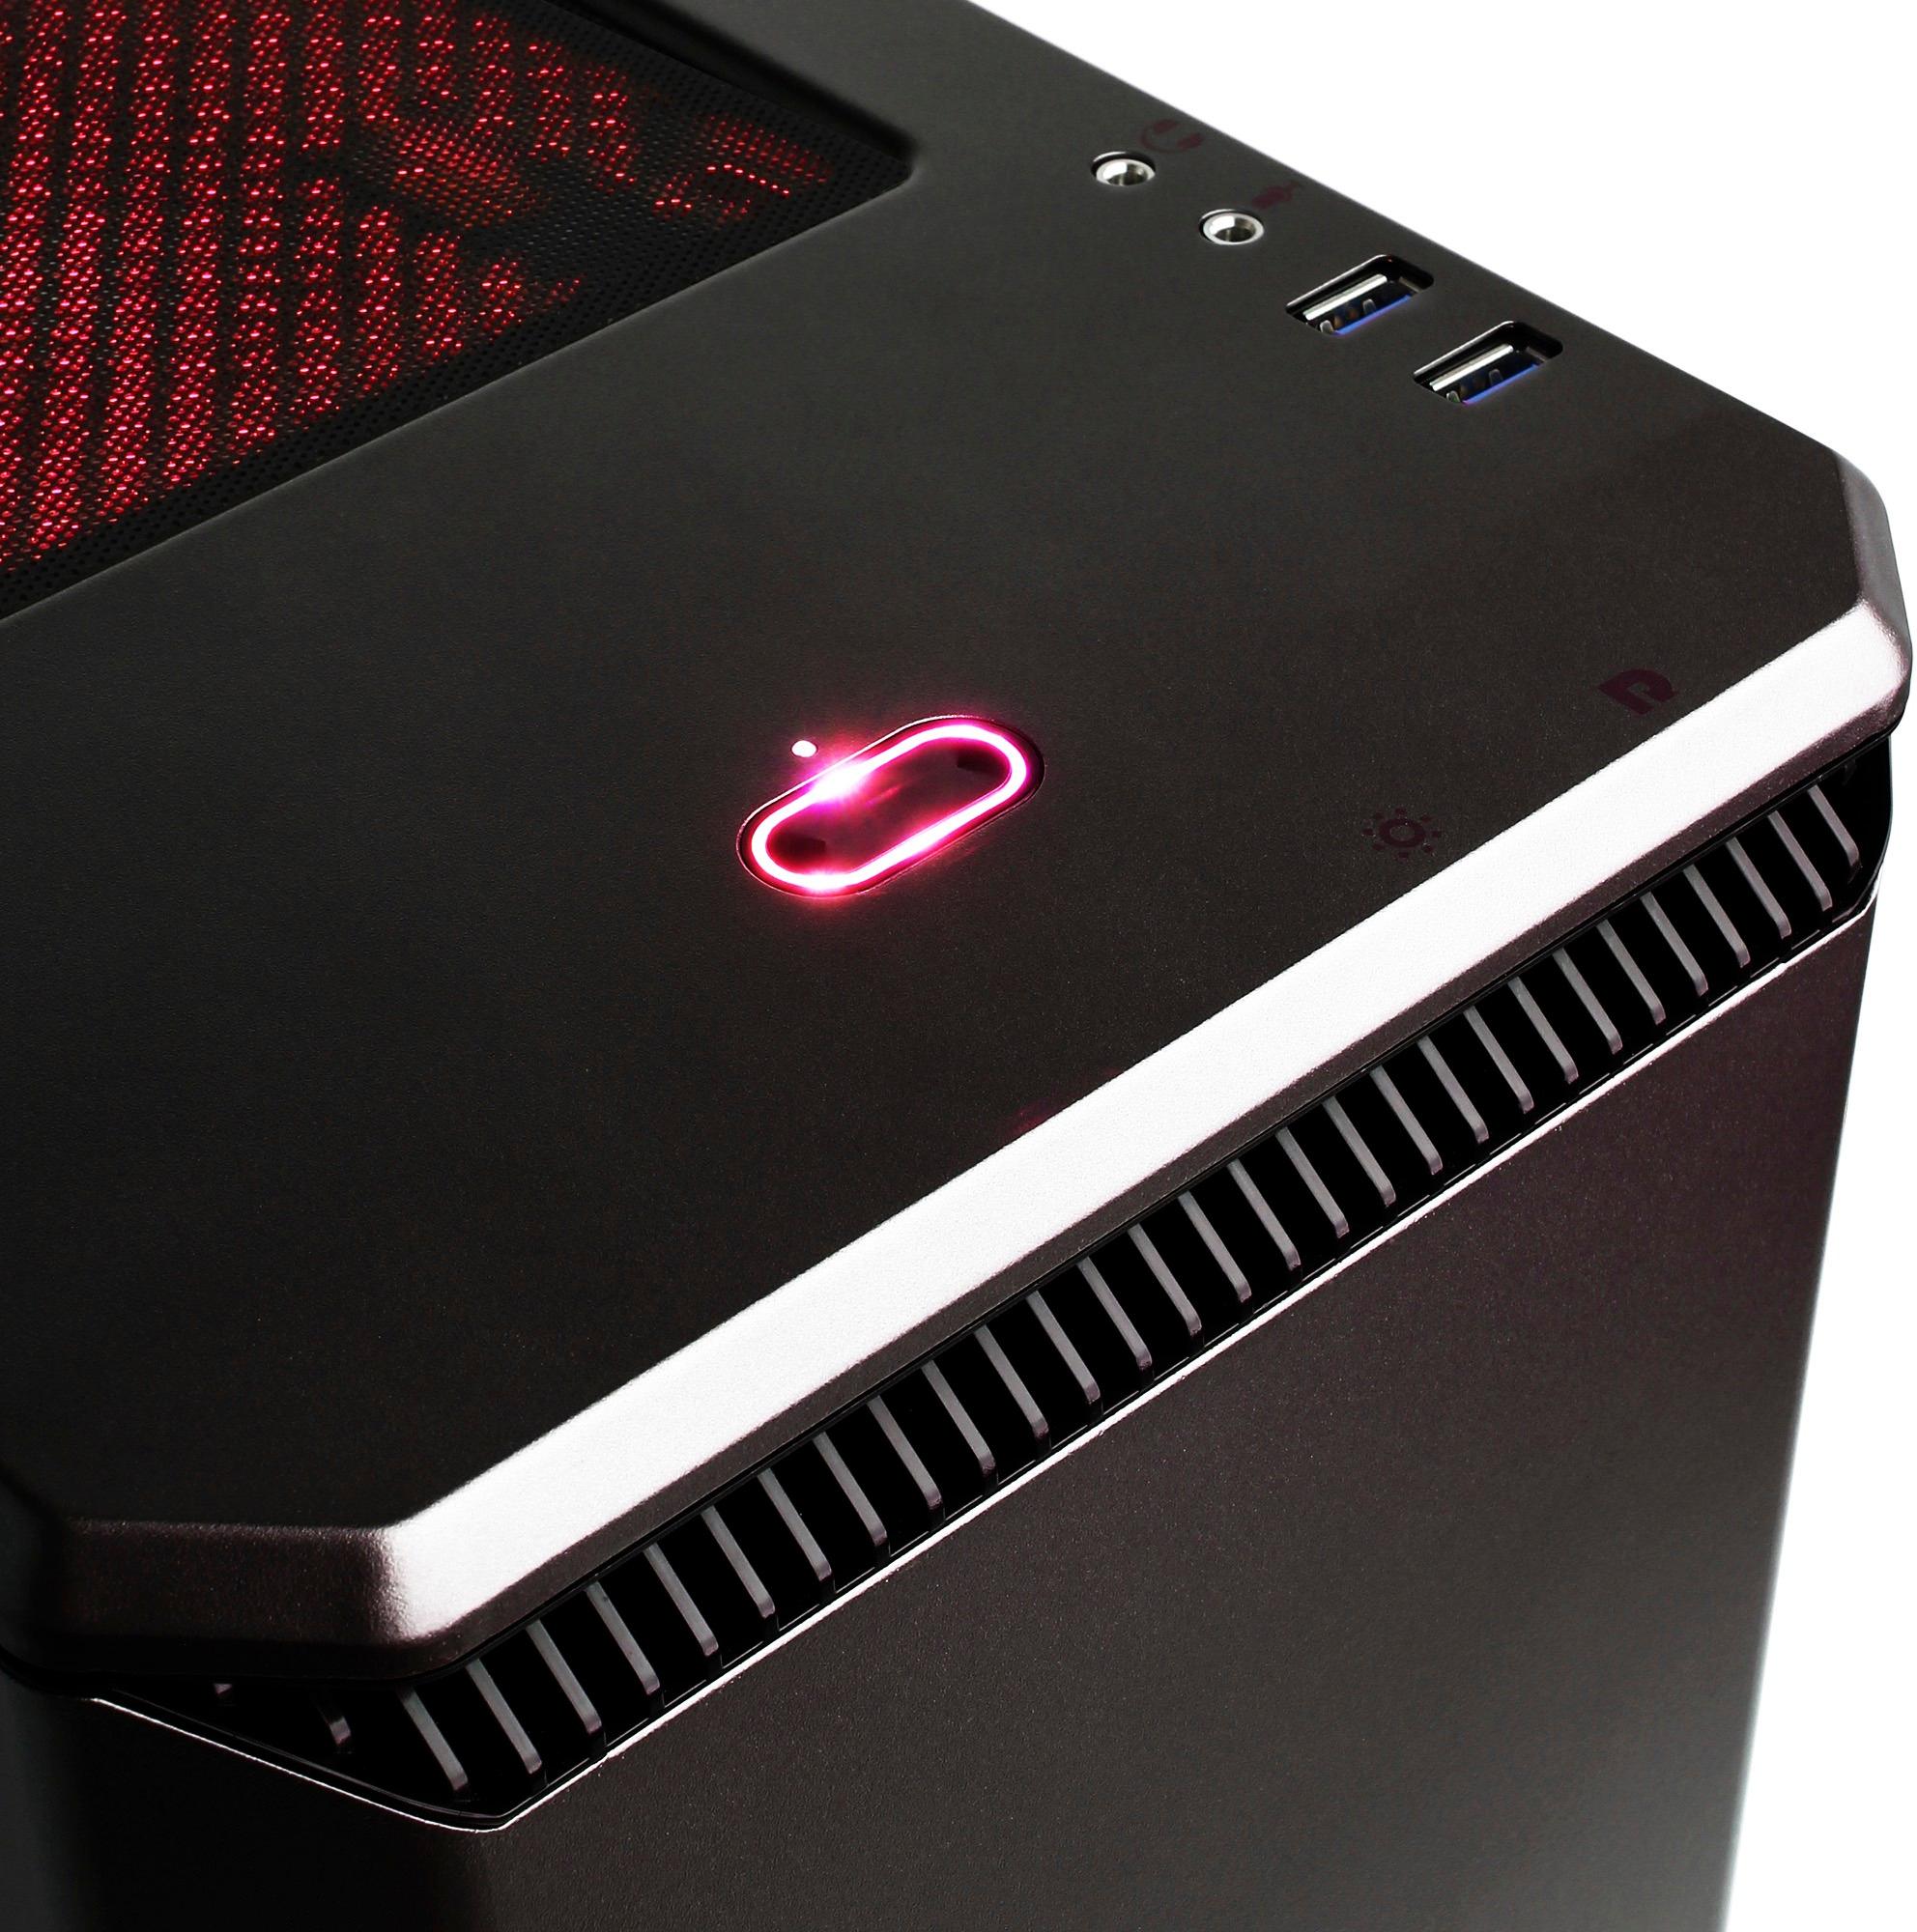 GMA40000BST by Cyberpower PC - Cyberpower PC Gaming Desktop